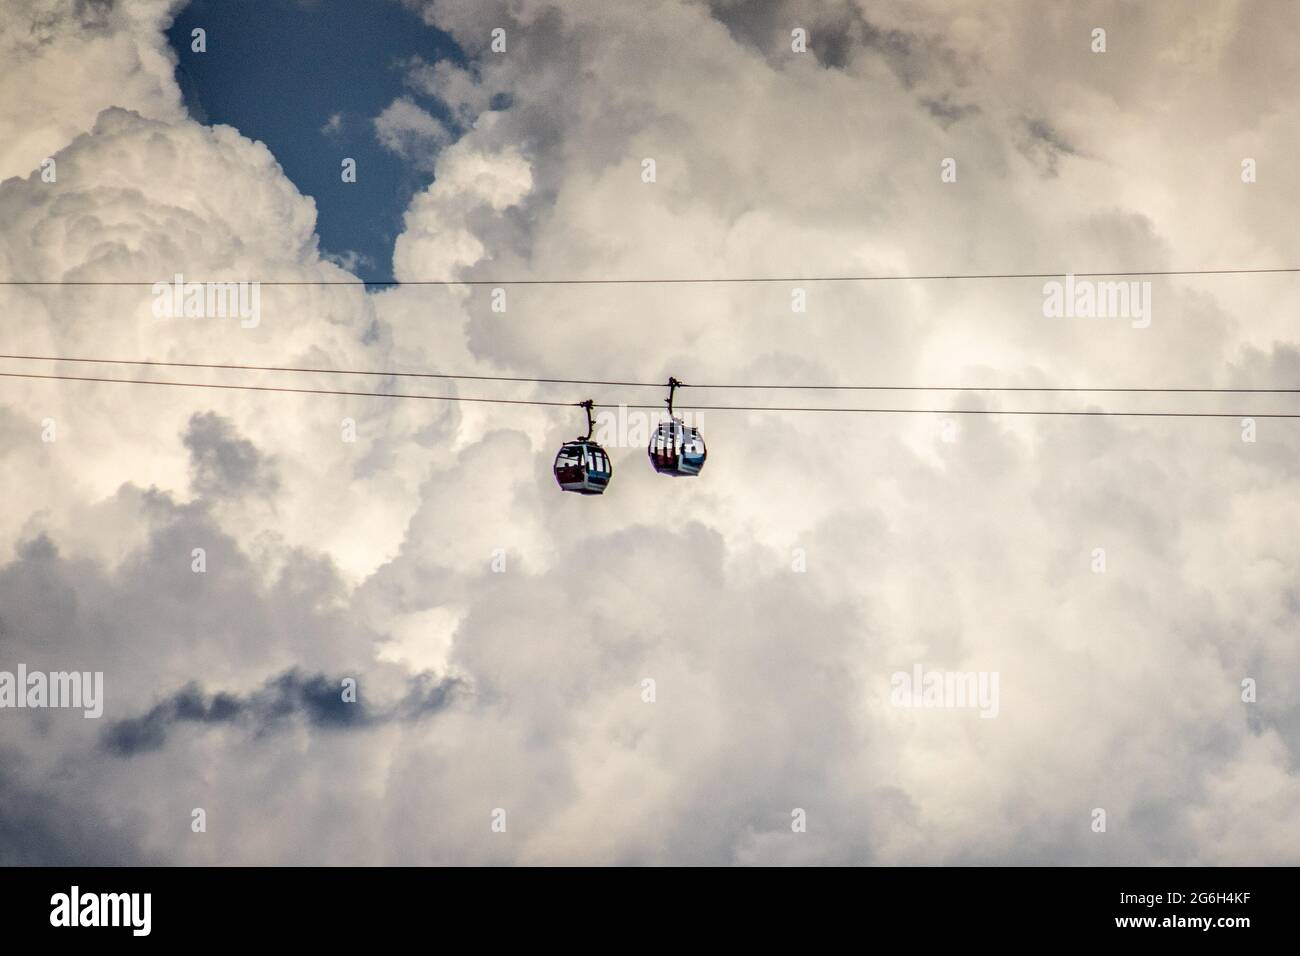 Emirates Air Line Cable Cars nelle nuvole Foto Stock